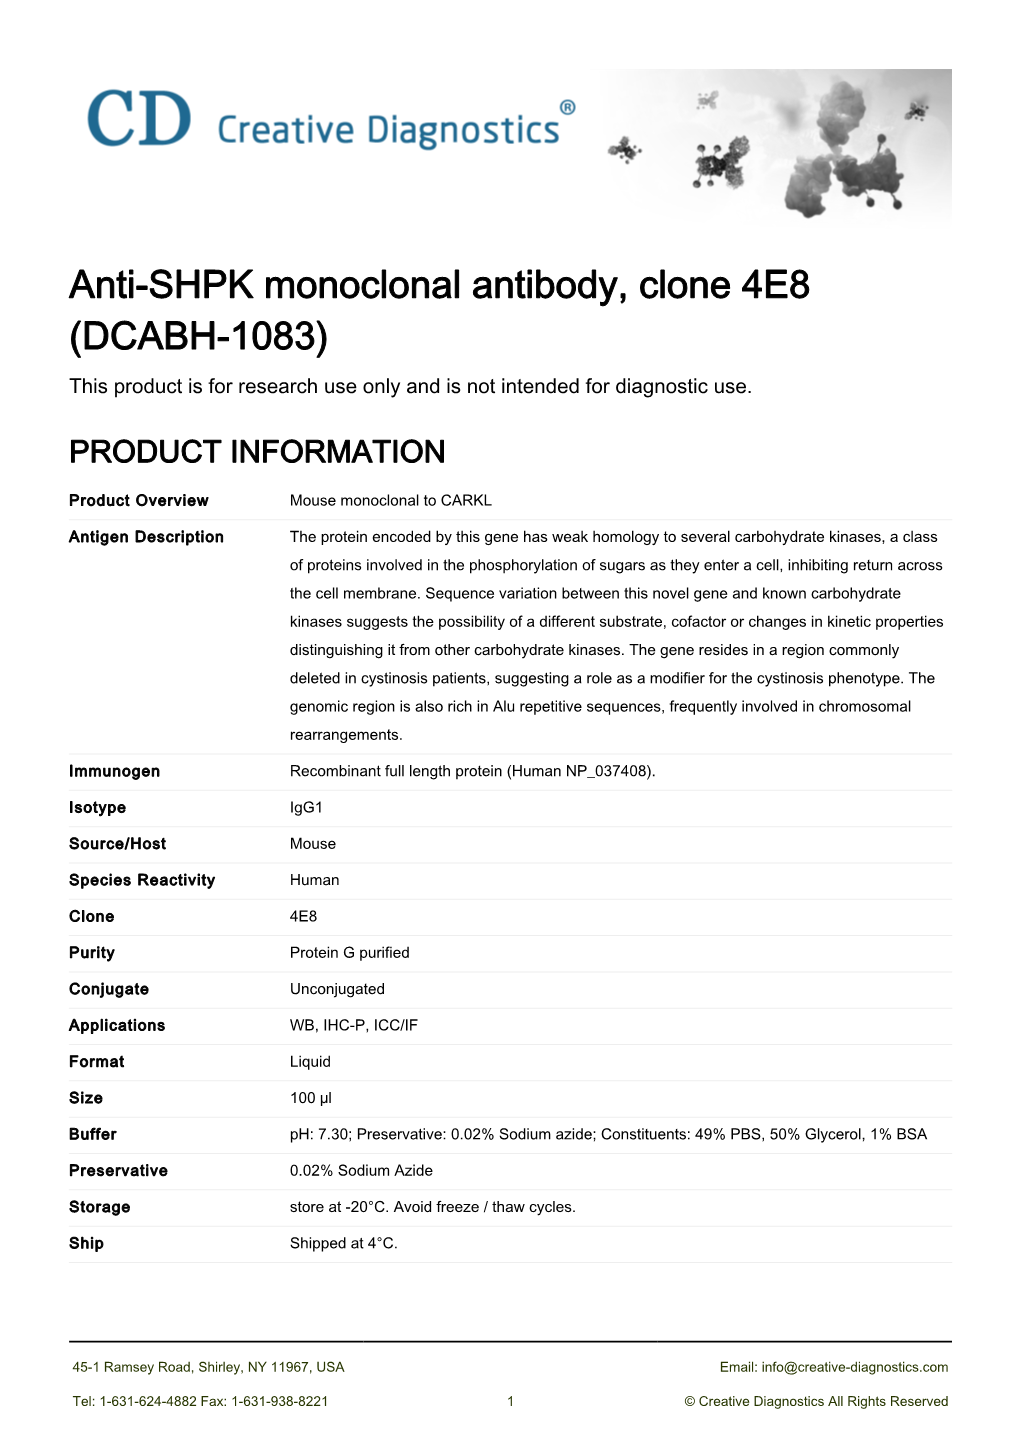 Anti-SHPK Monoclonal Antibody, Clone 4E8 (DCABH-1083) This Product Is for Research Use Only and Is Not Intended for Diagnostic Use